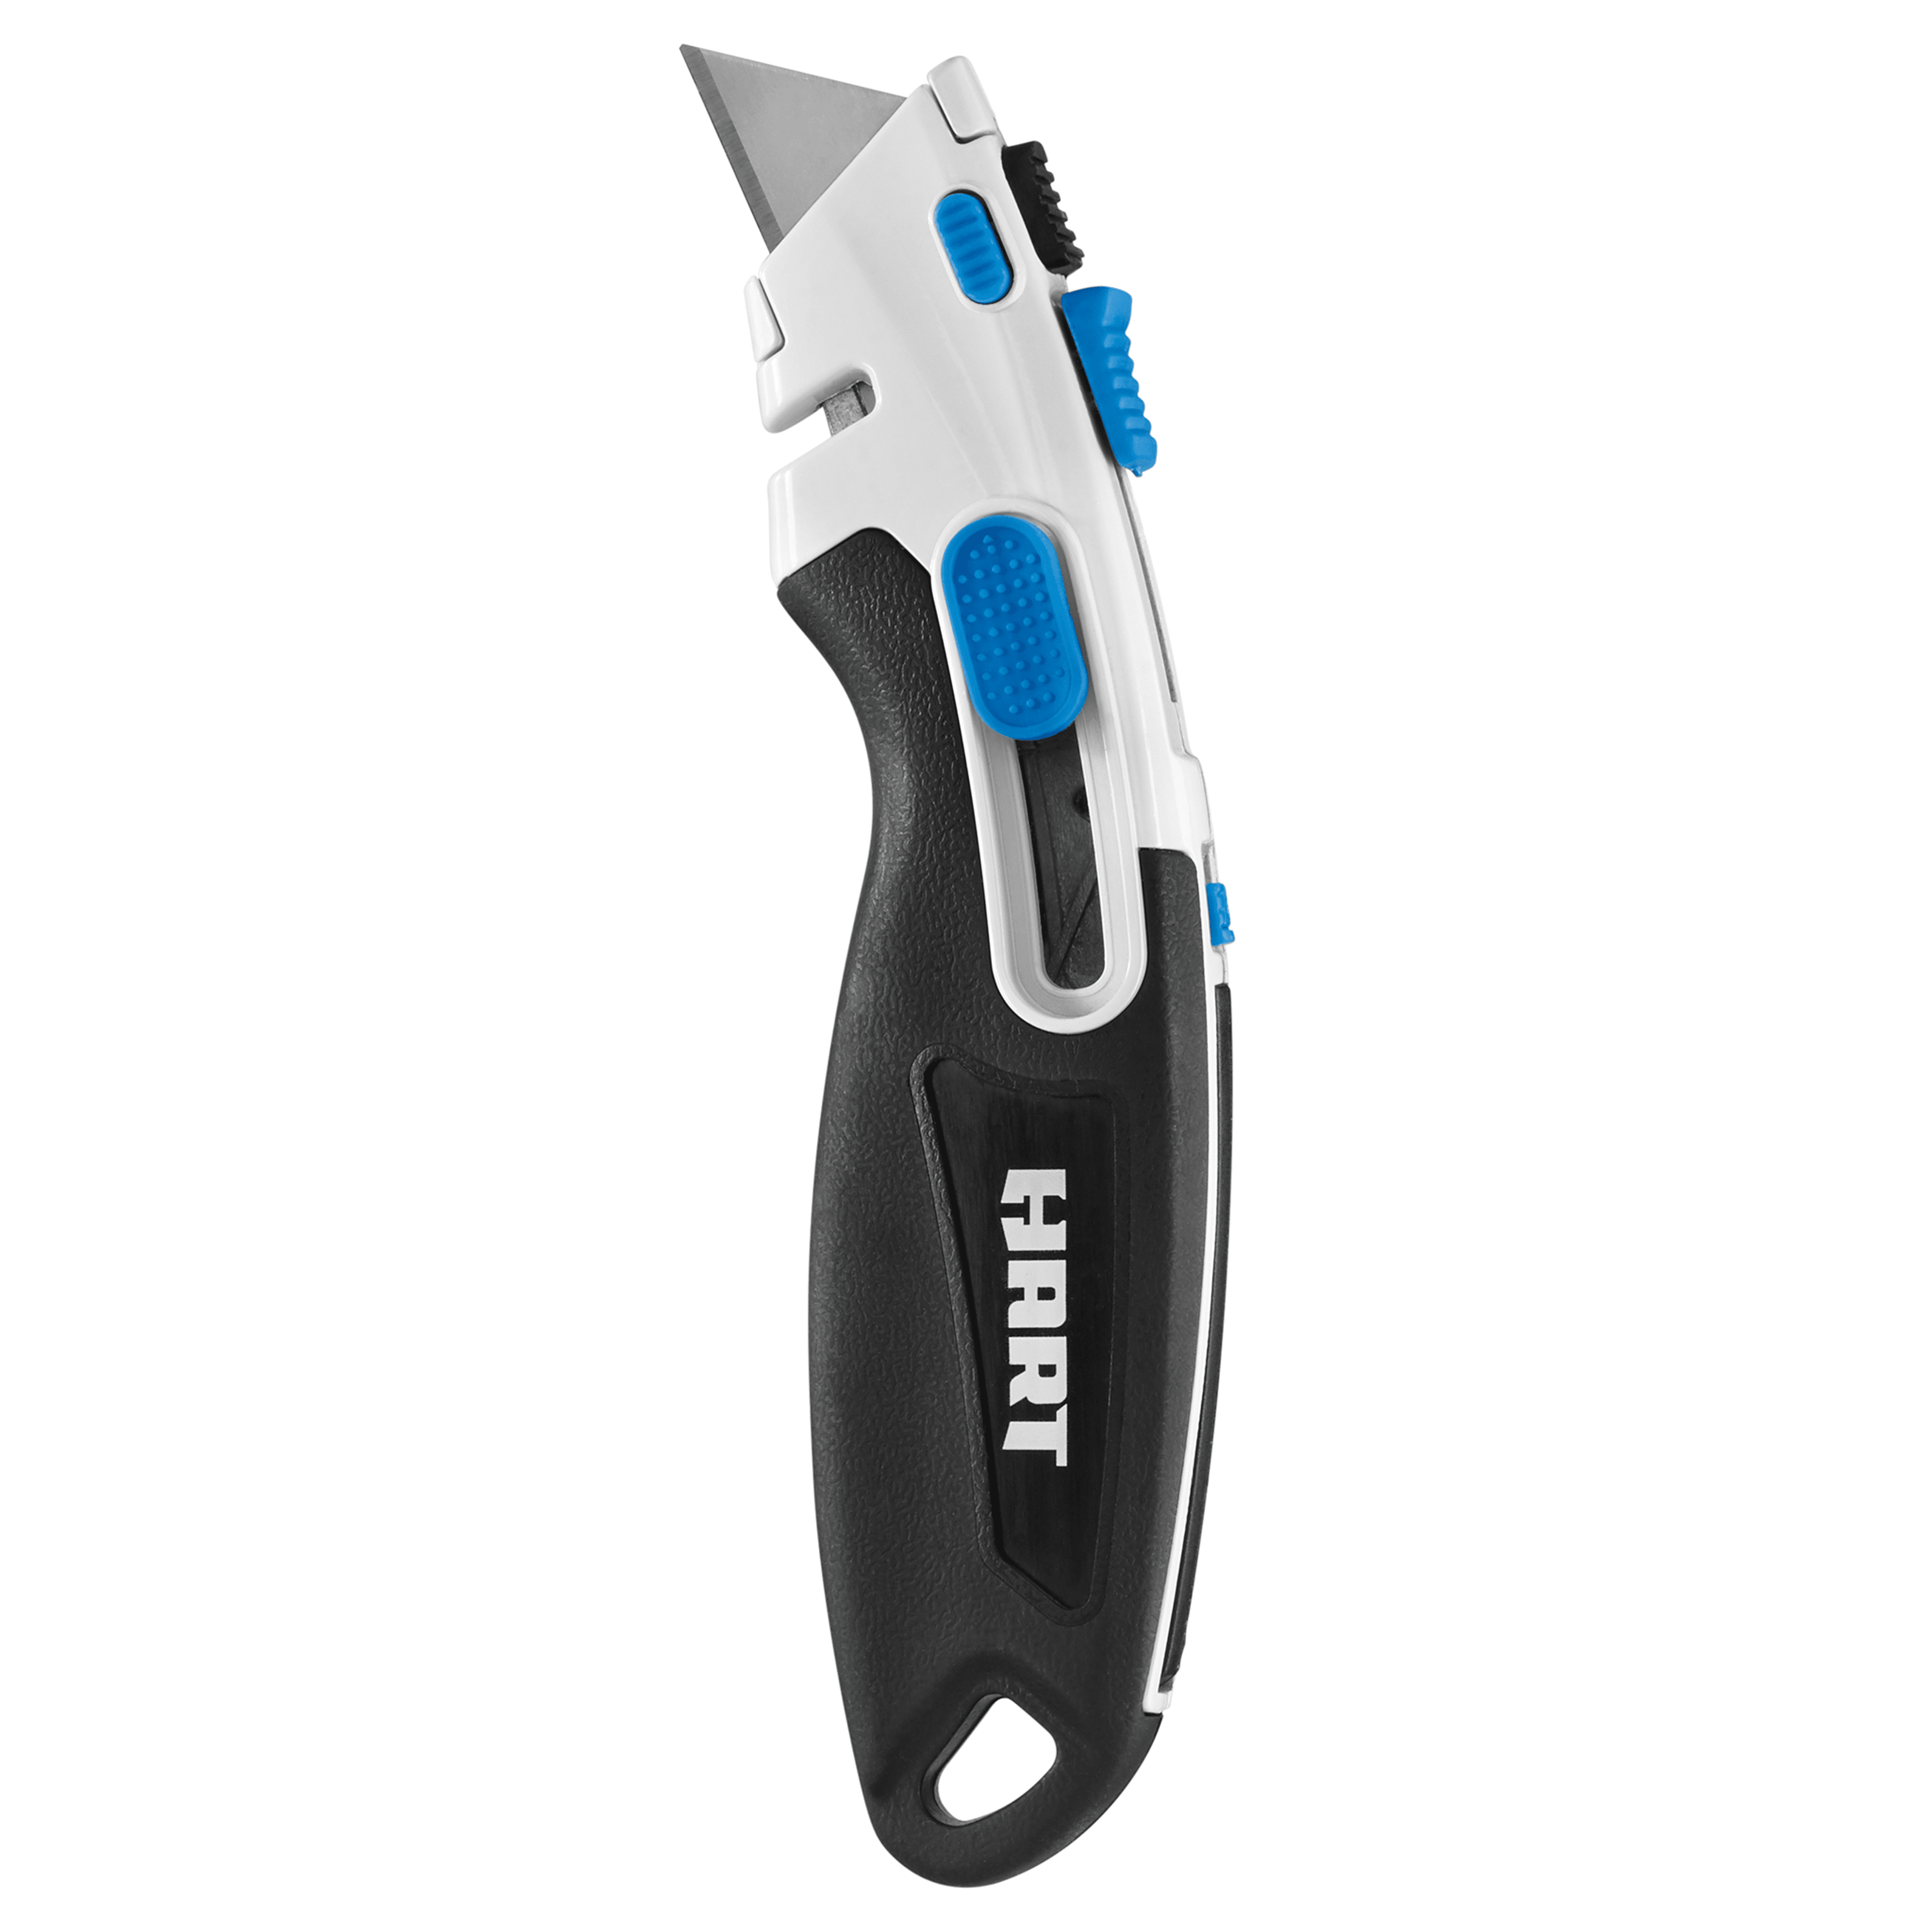 HART 2-in-1 Safety Utility Knife w/ In-Handle Blade Storage $4.70  + Free S&H w/ Walmart+ or $35+